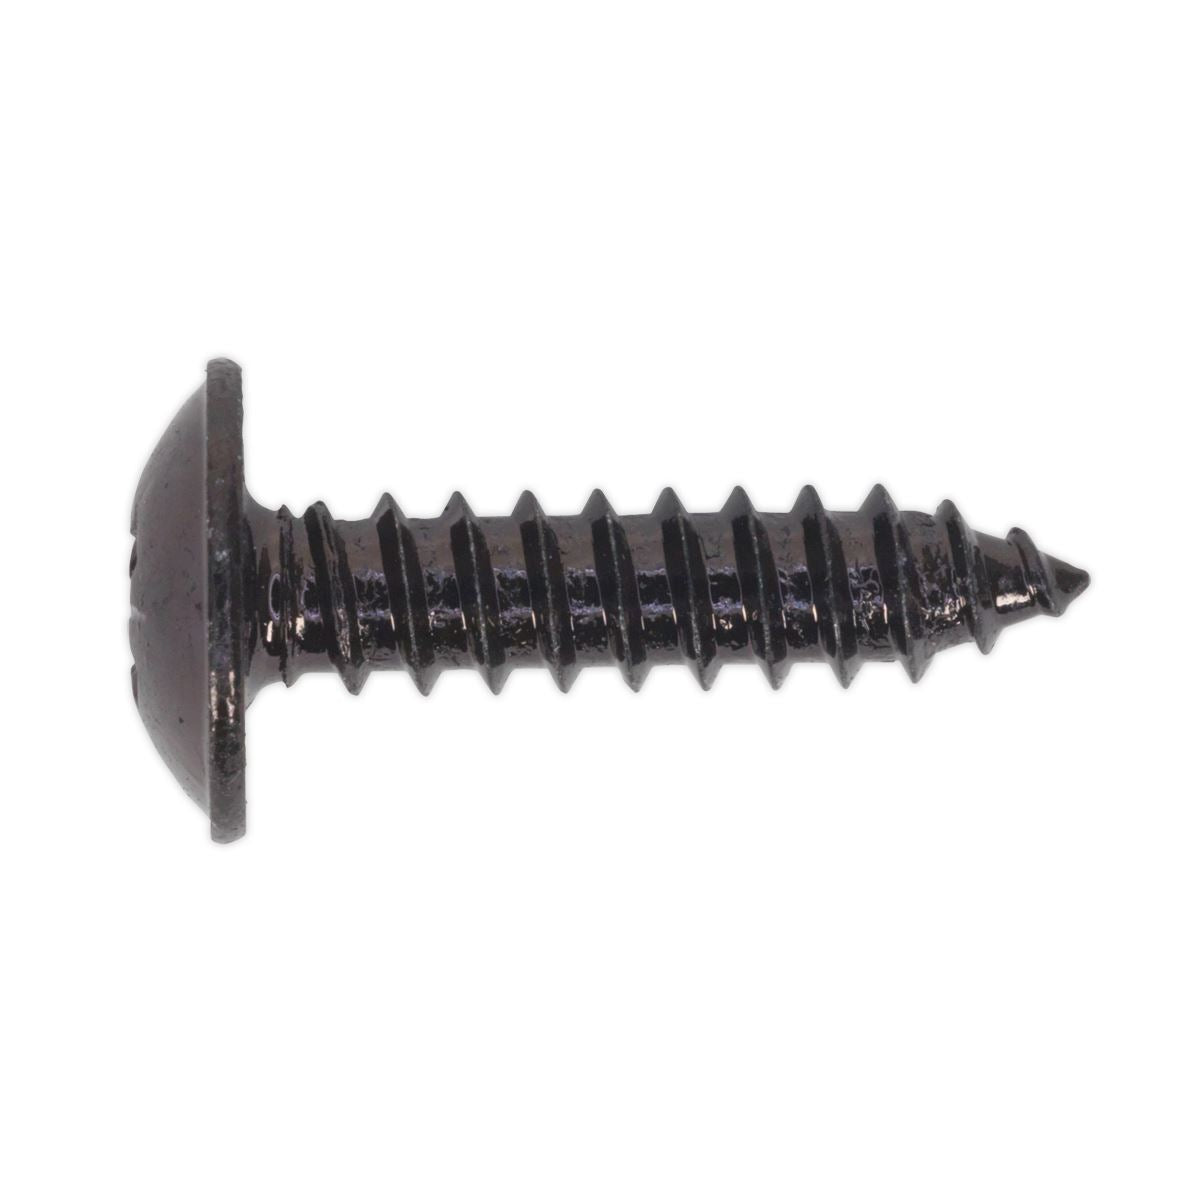 Sealey Self-Tapping Screw 4.8 x 19mm Flanged Head Black Pozi Pack of 100